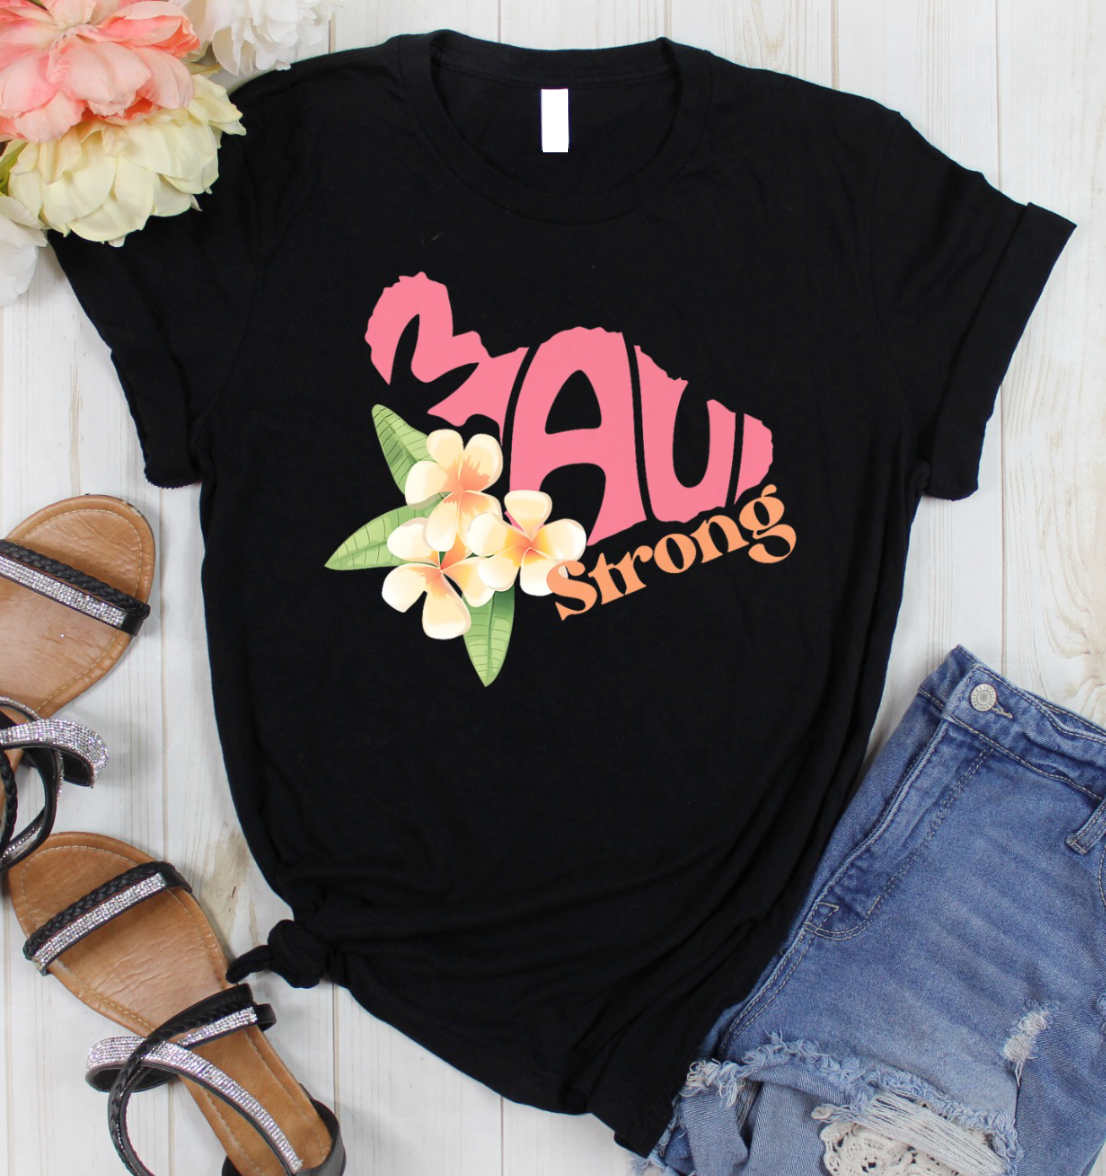 MAUI STRONG Graphic T-shirt Graphic Tee Southern Soul Collectives 